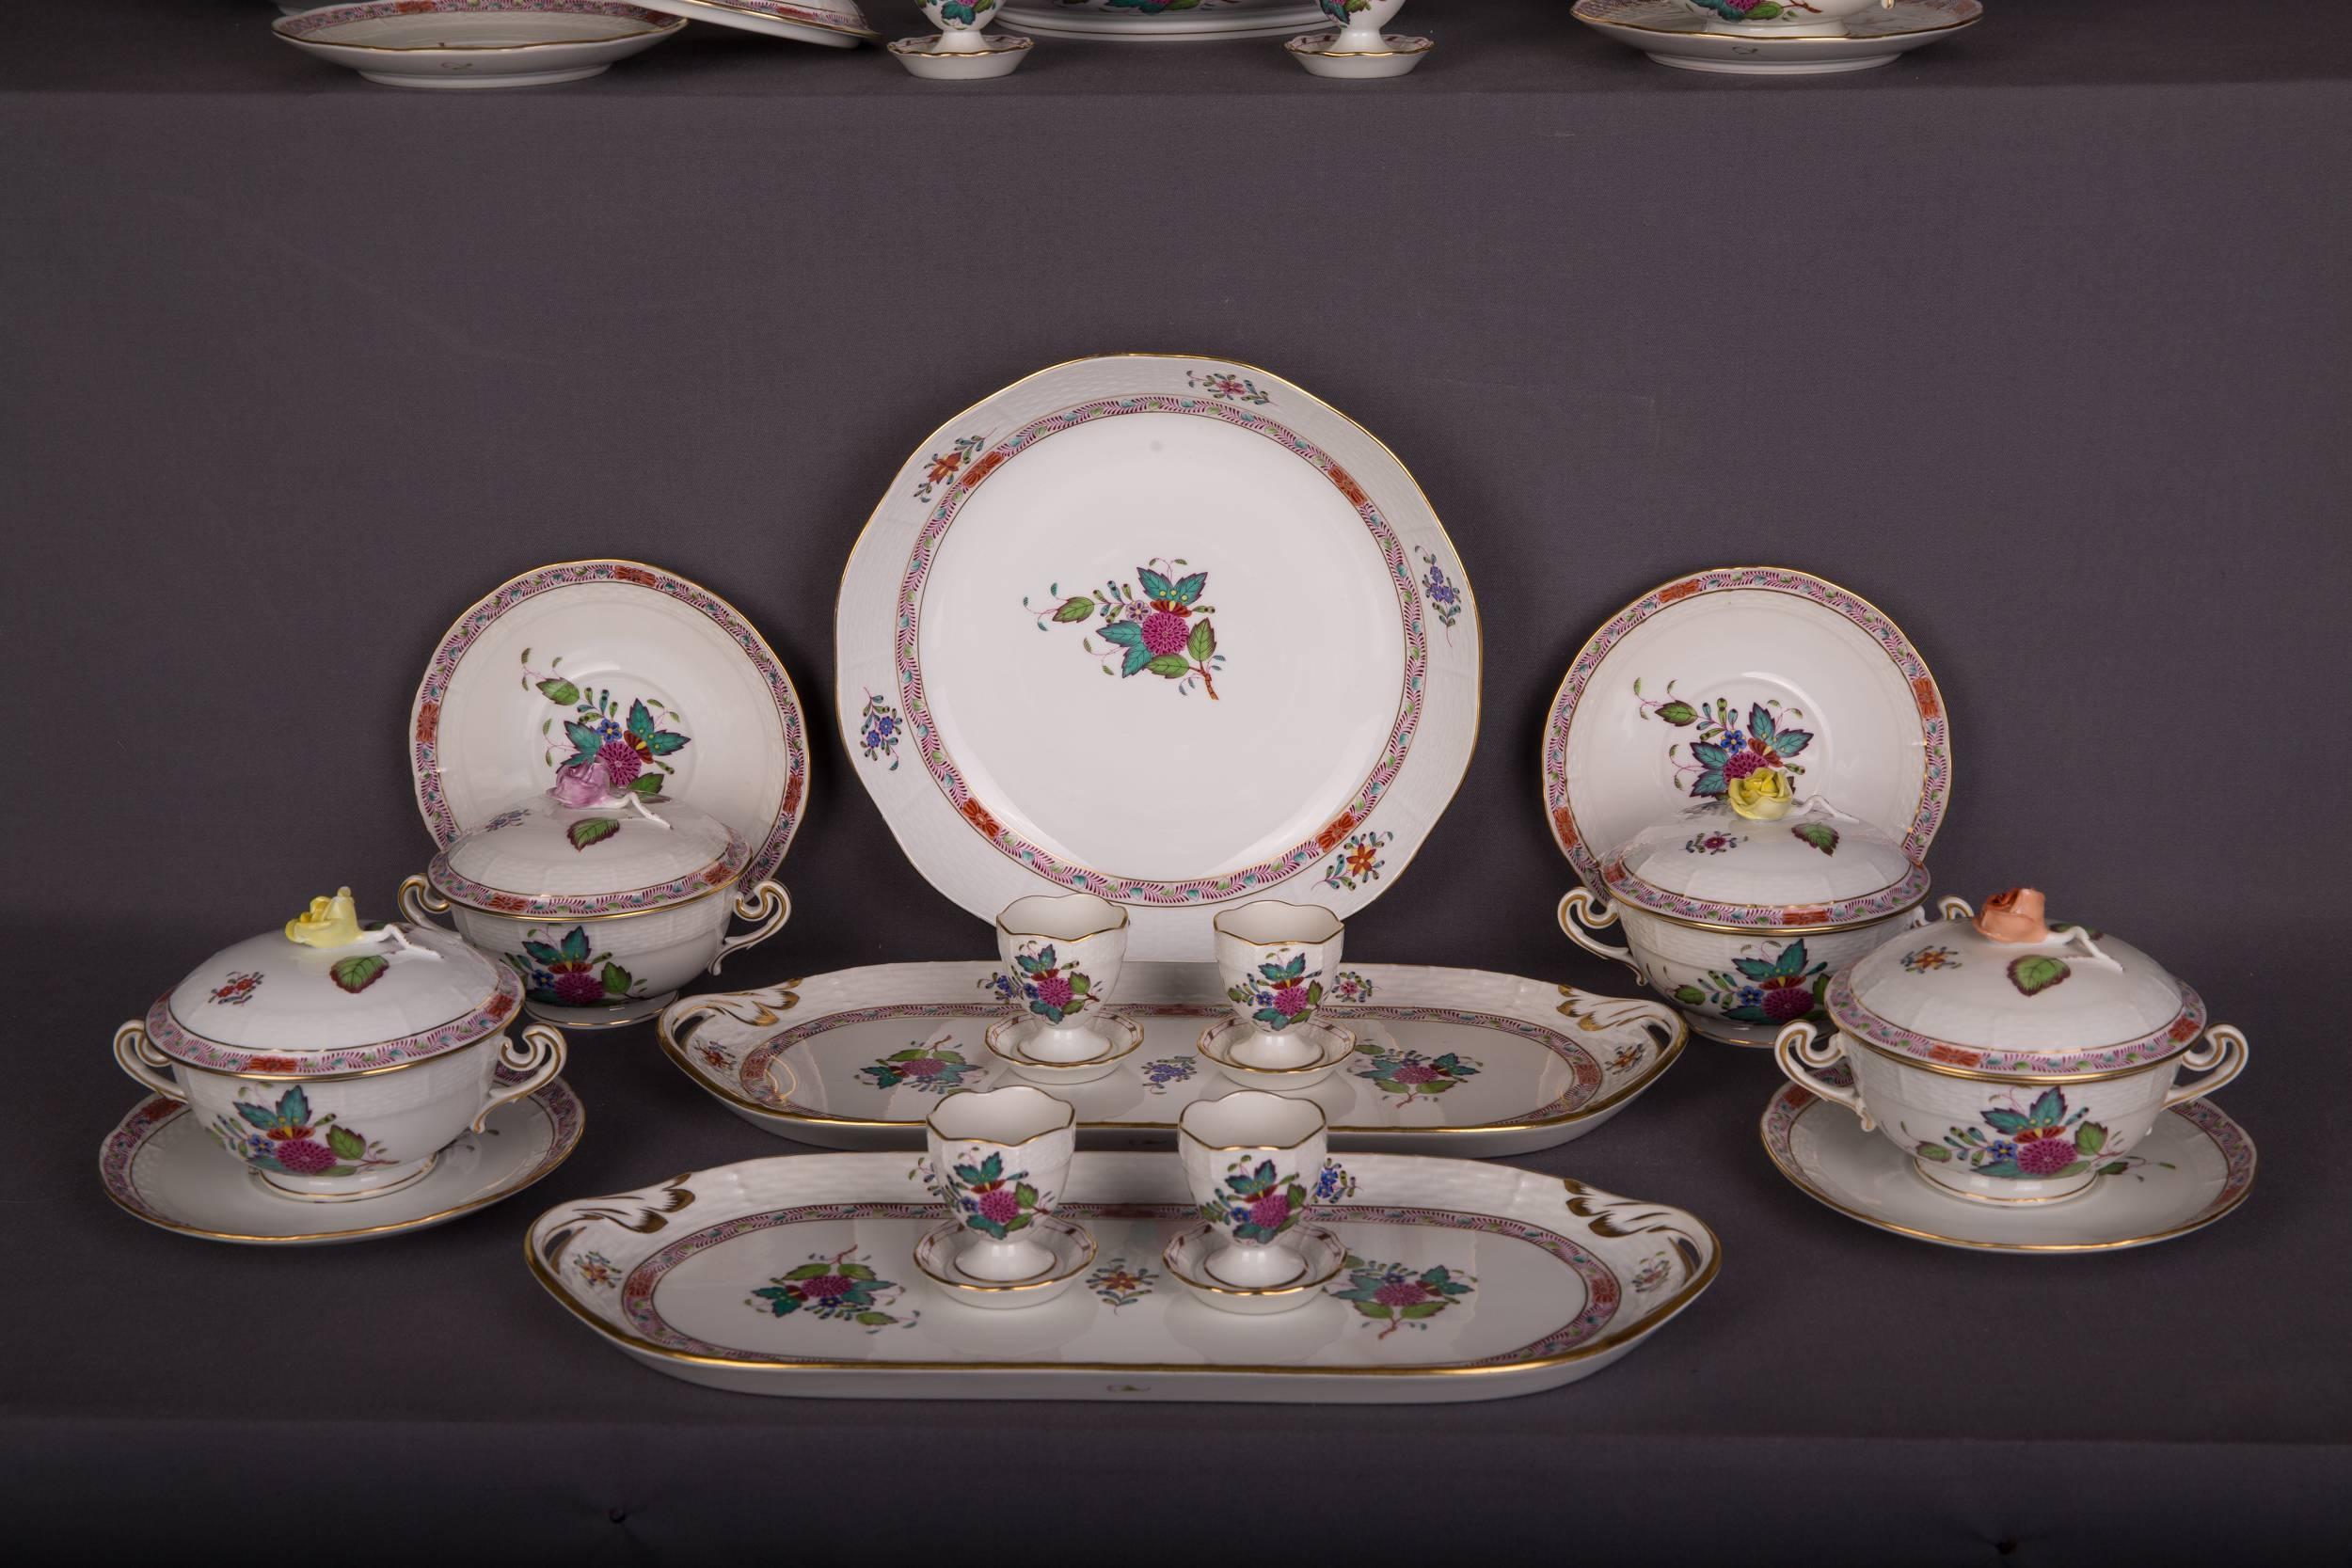 Other Extensive Rare Herend Dining Service Porcelain with a Lot of Flowers and Gold